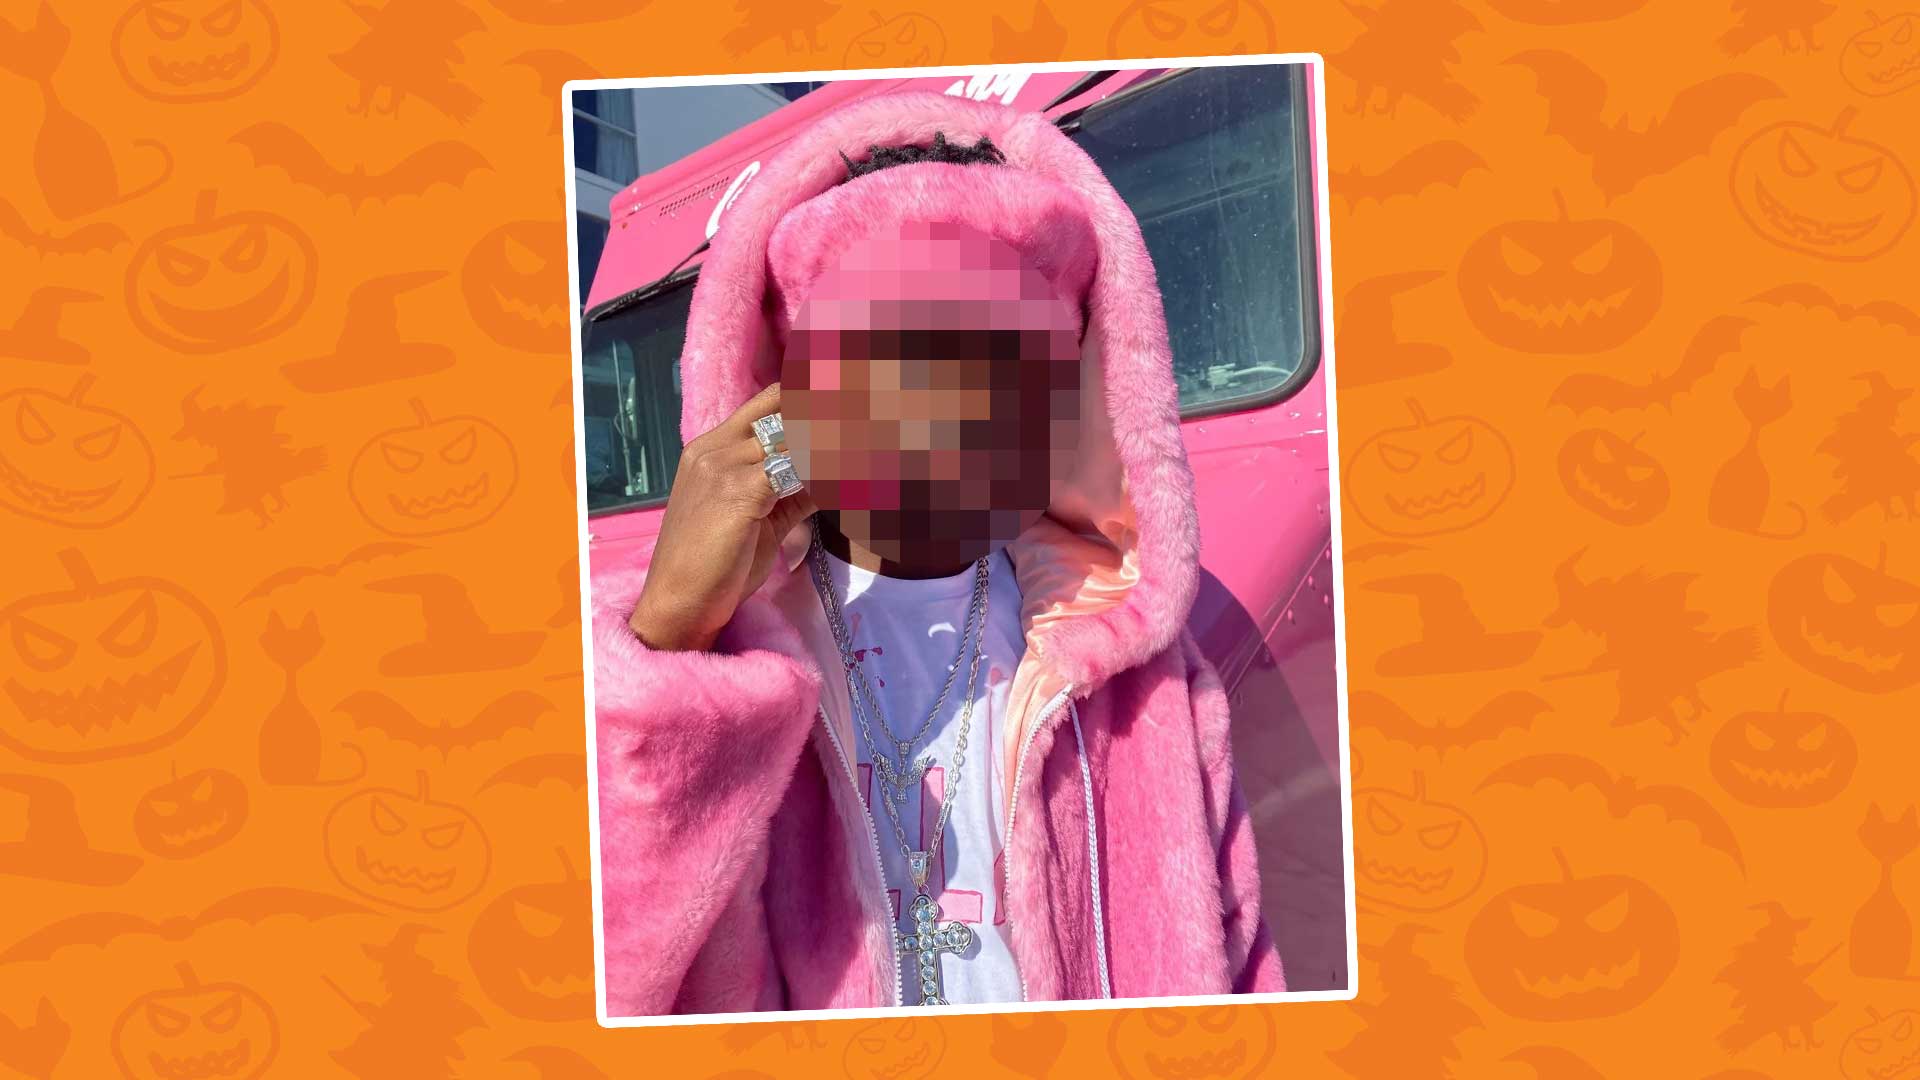 A man dressed as a pink rabbit